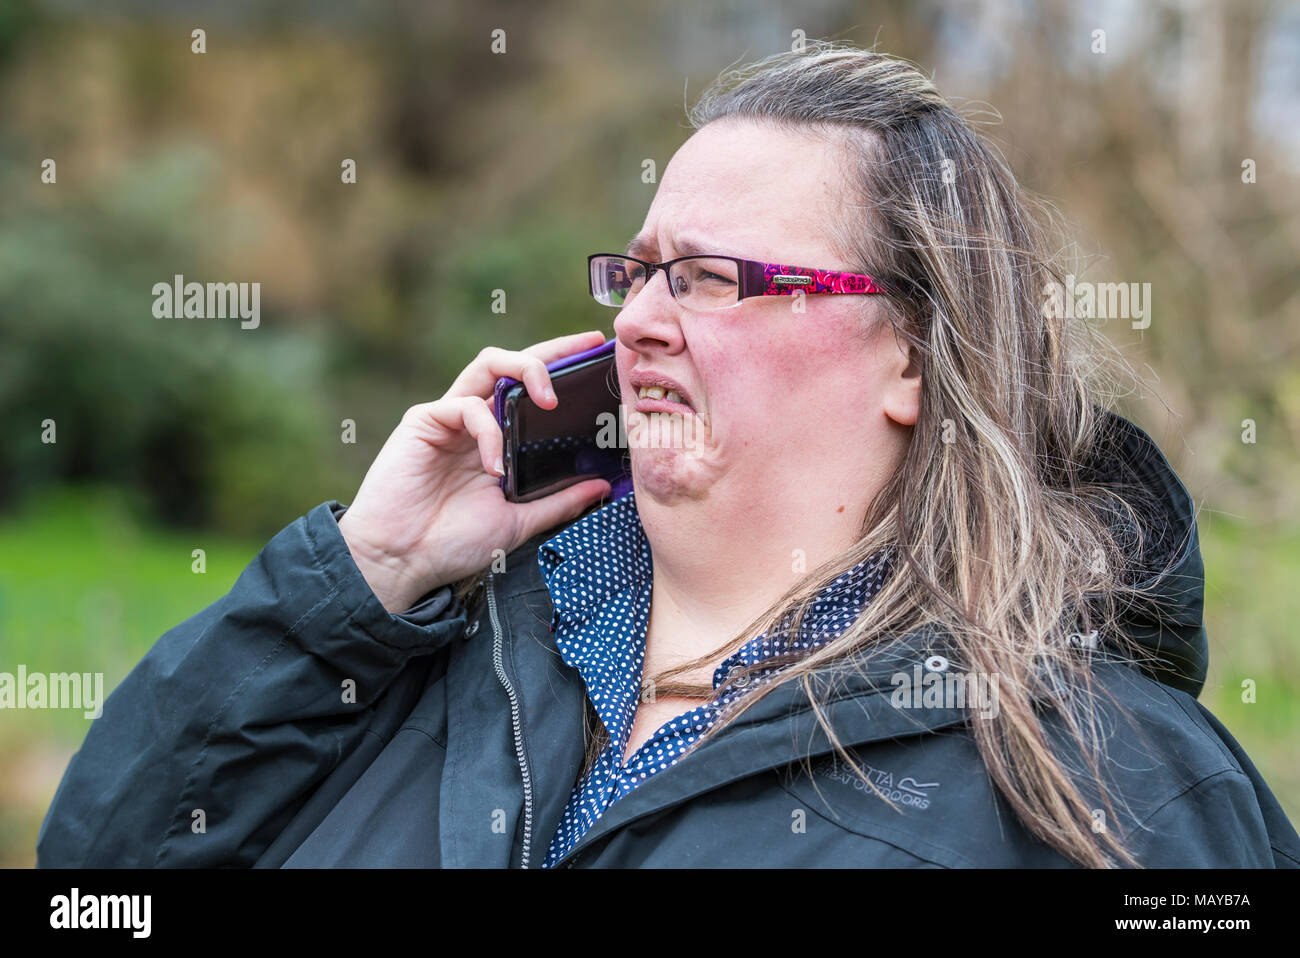 Caucasian Woman on mobile phone reacting to bad, shocking or disgusting news. Shocked concept. Bad news concept. Disgusted facial expression. Stock Photo